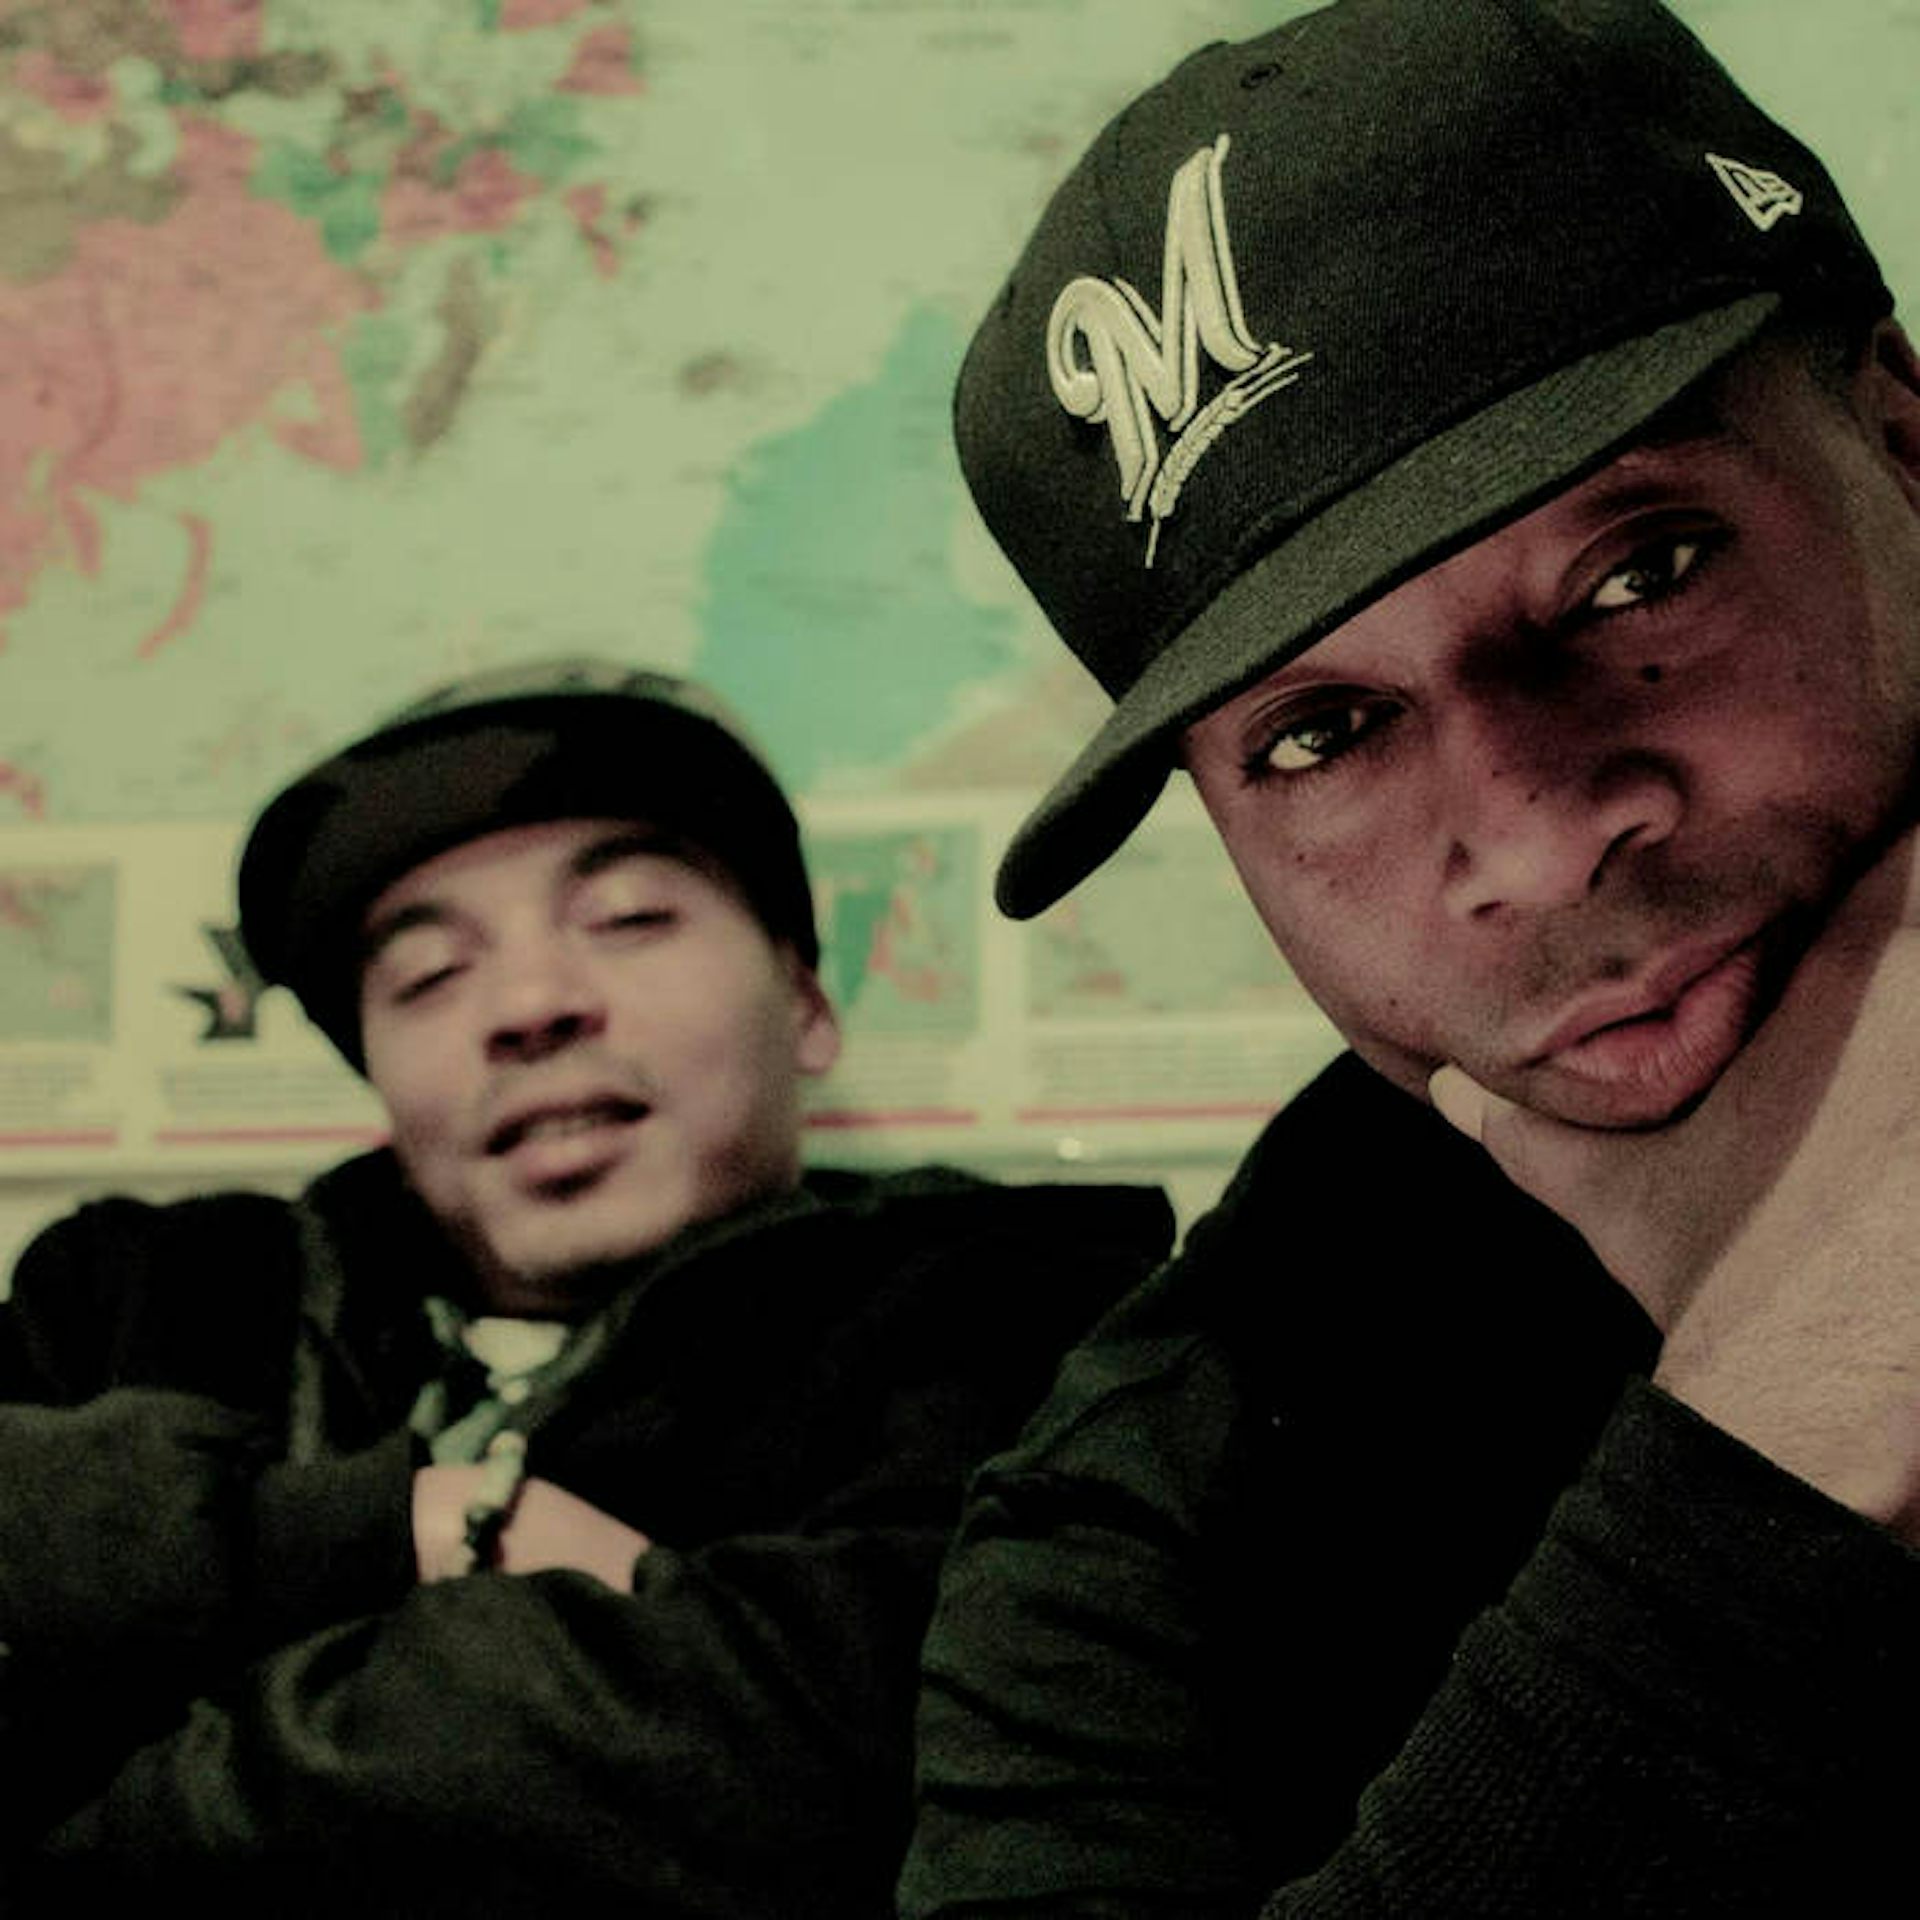 Two Black men look directly at the camera against the backdrop of a world map.